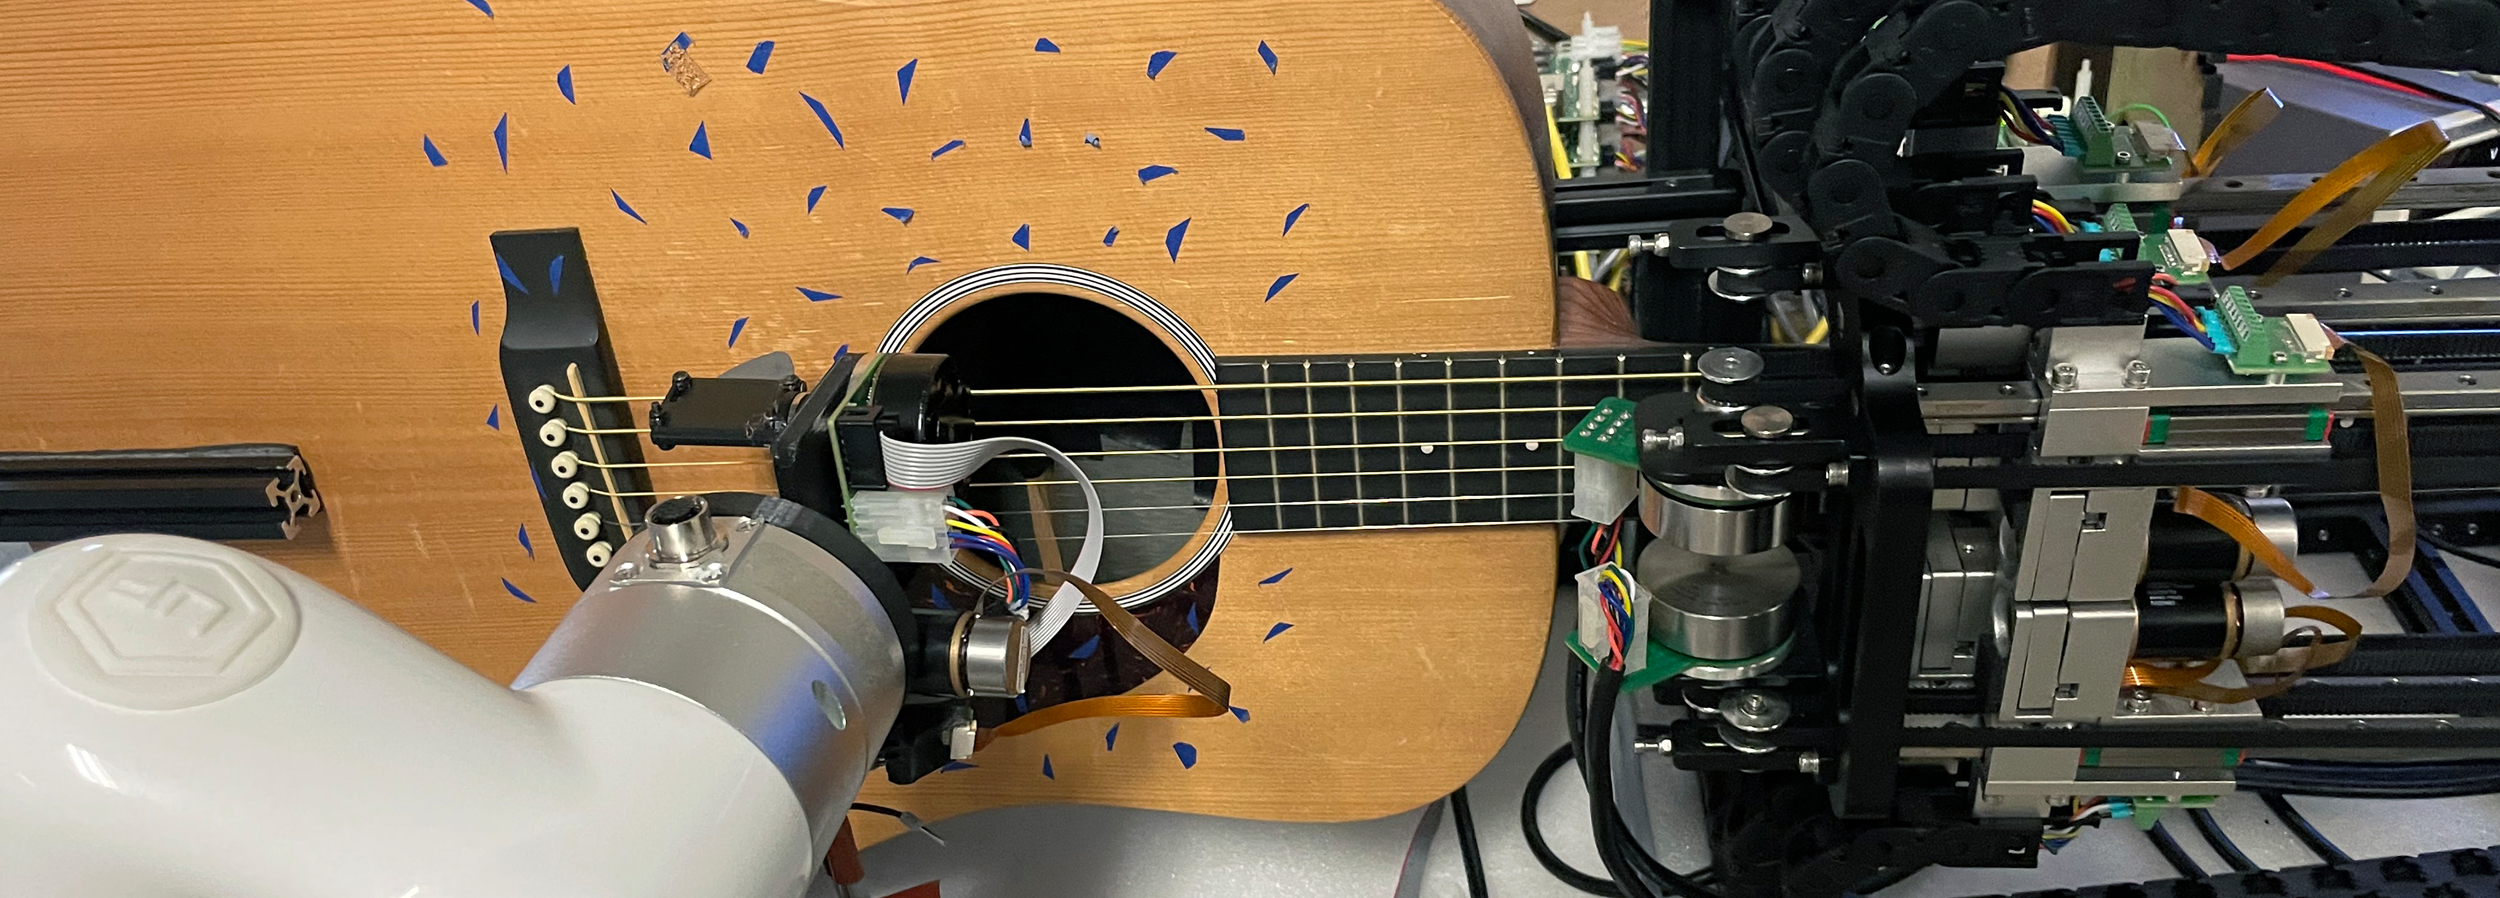 Up-close view of Georgia Tech's robot guitarist in action